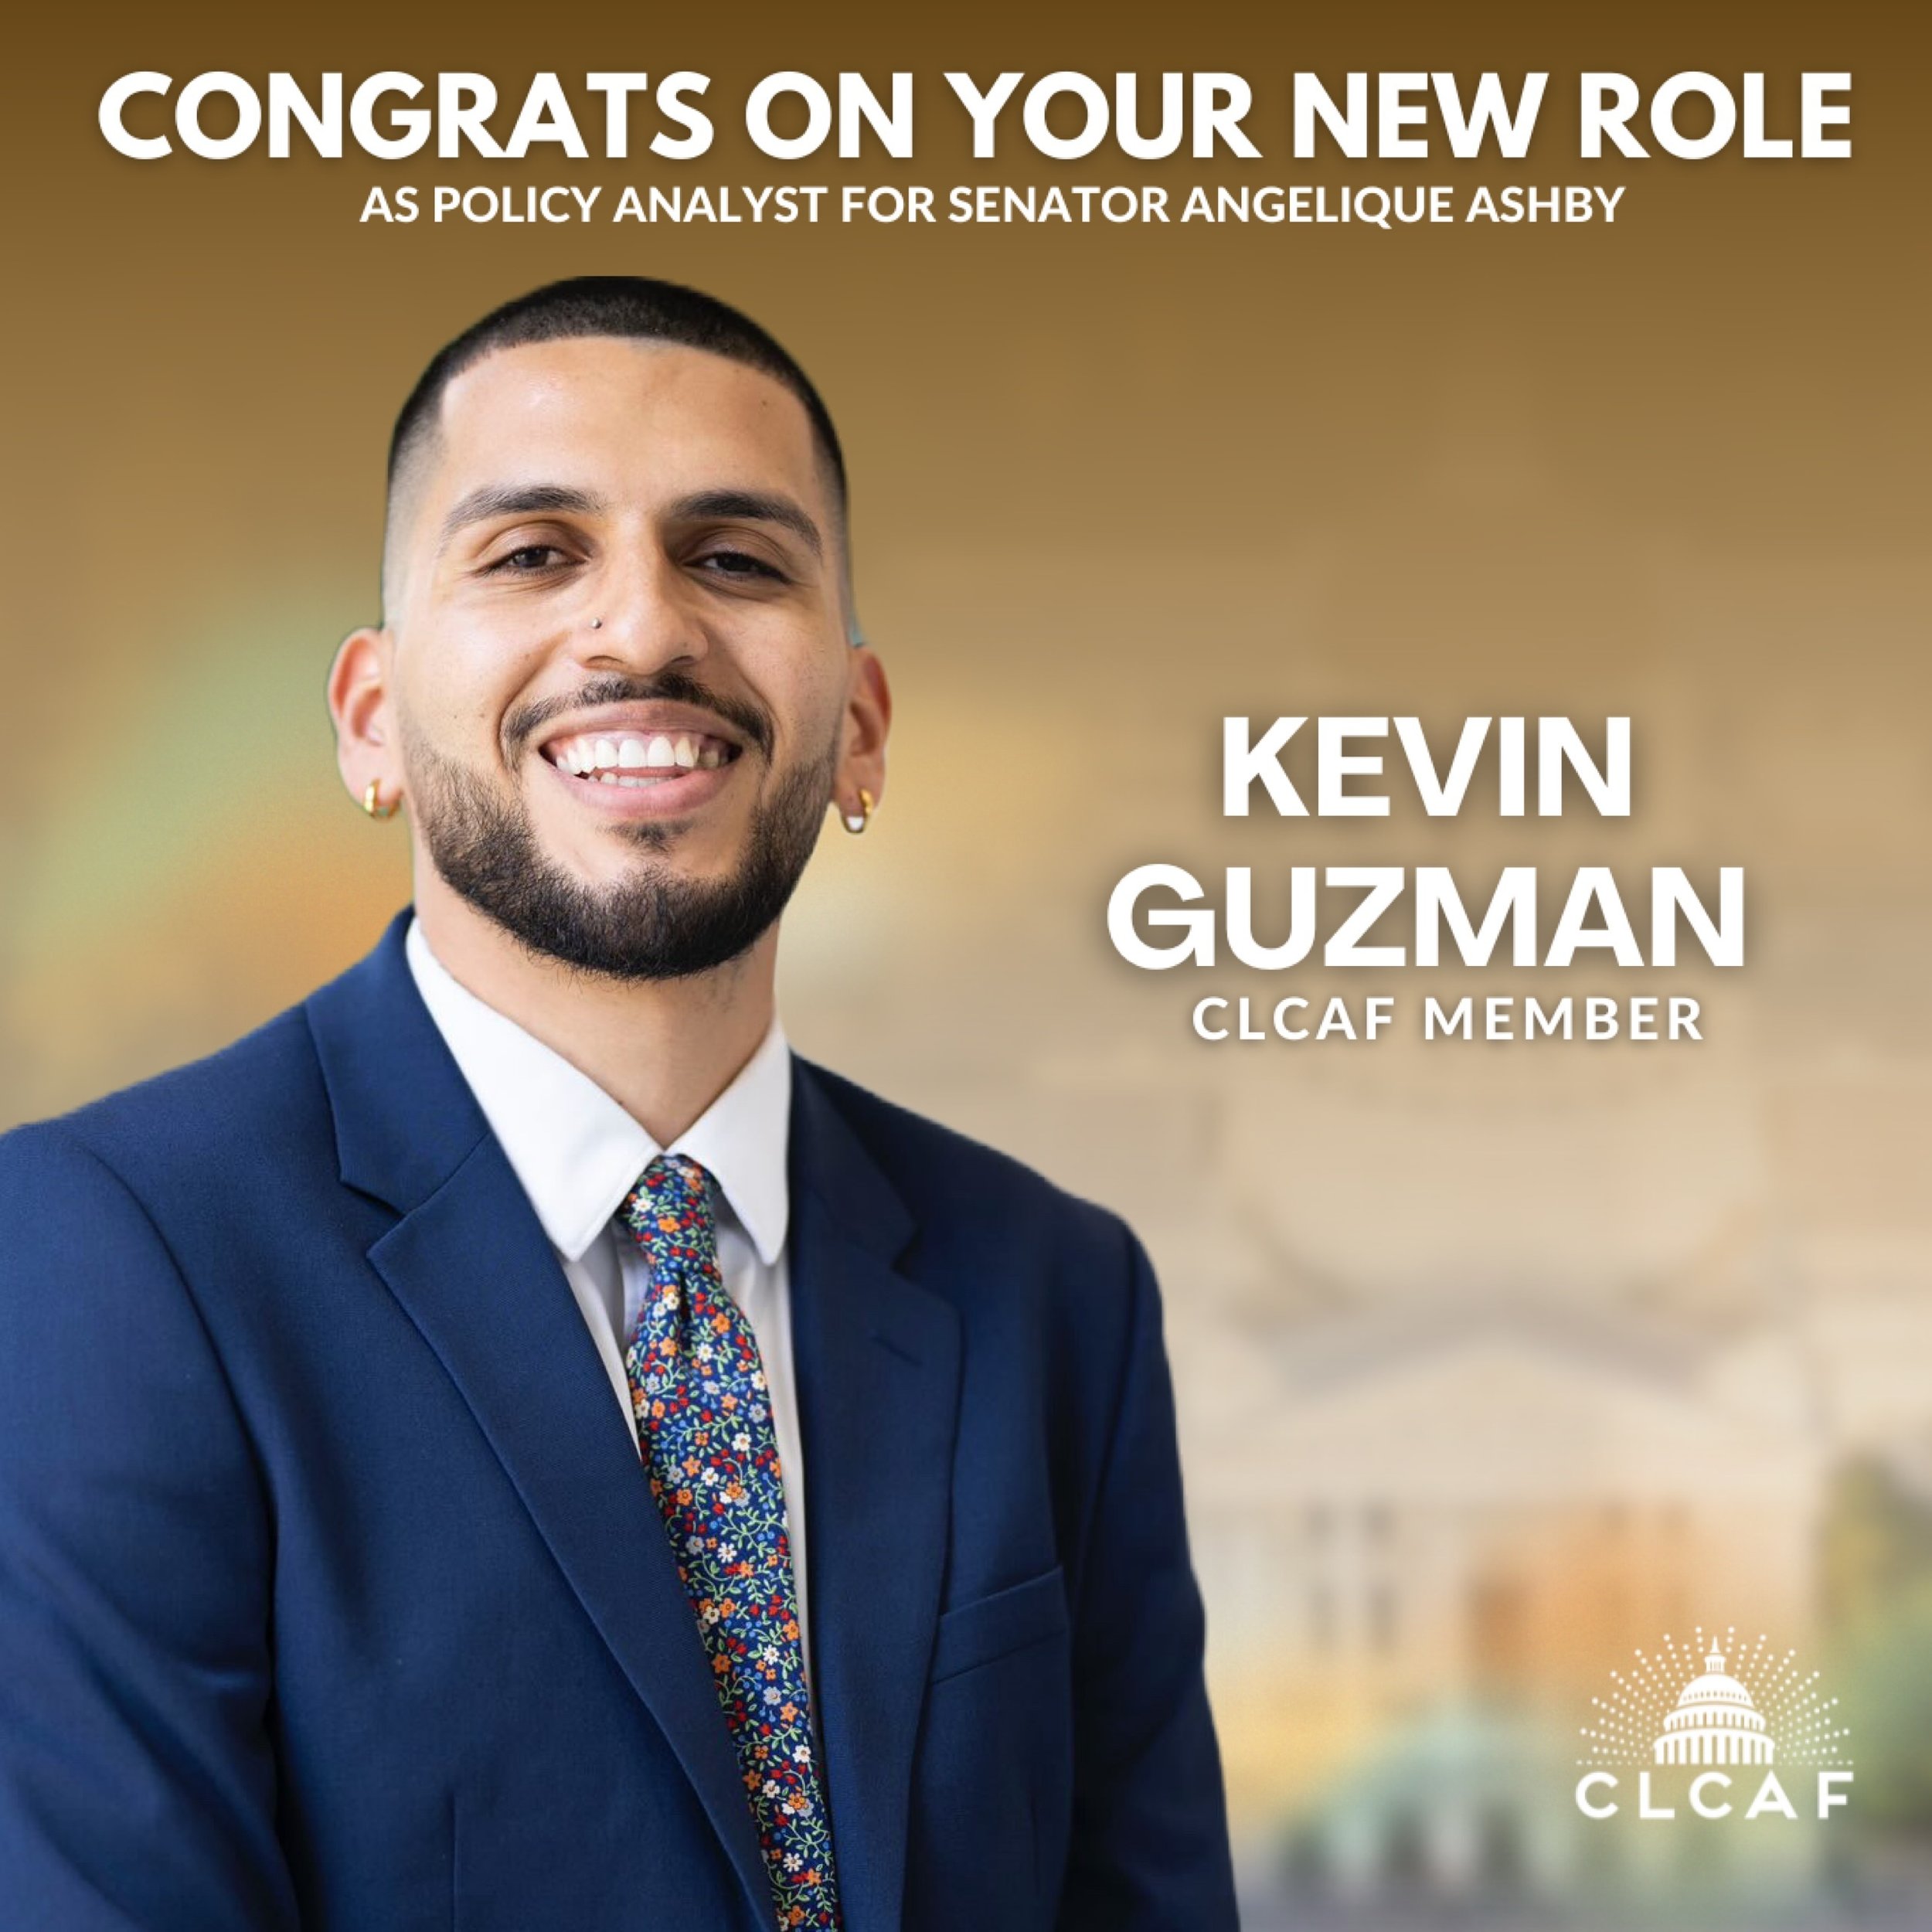 ⭐️ Spotlight Alert ⭐️ 

🎉Join us in congratulating Kevin Guzman for his promotion as Policy Analyst for Senator Angelique Ashby!

Kevin was previously a Legislative Aide for Senator Ashby and a Sacramento Semester Intern for Senator Steve Glazer. He